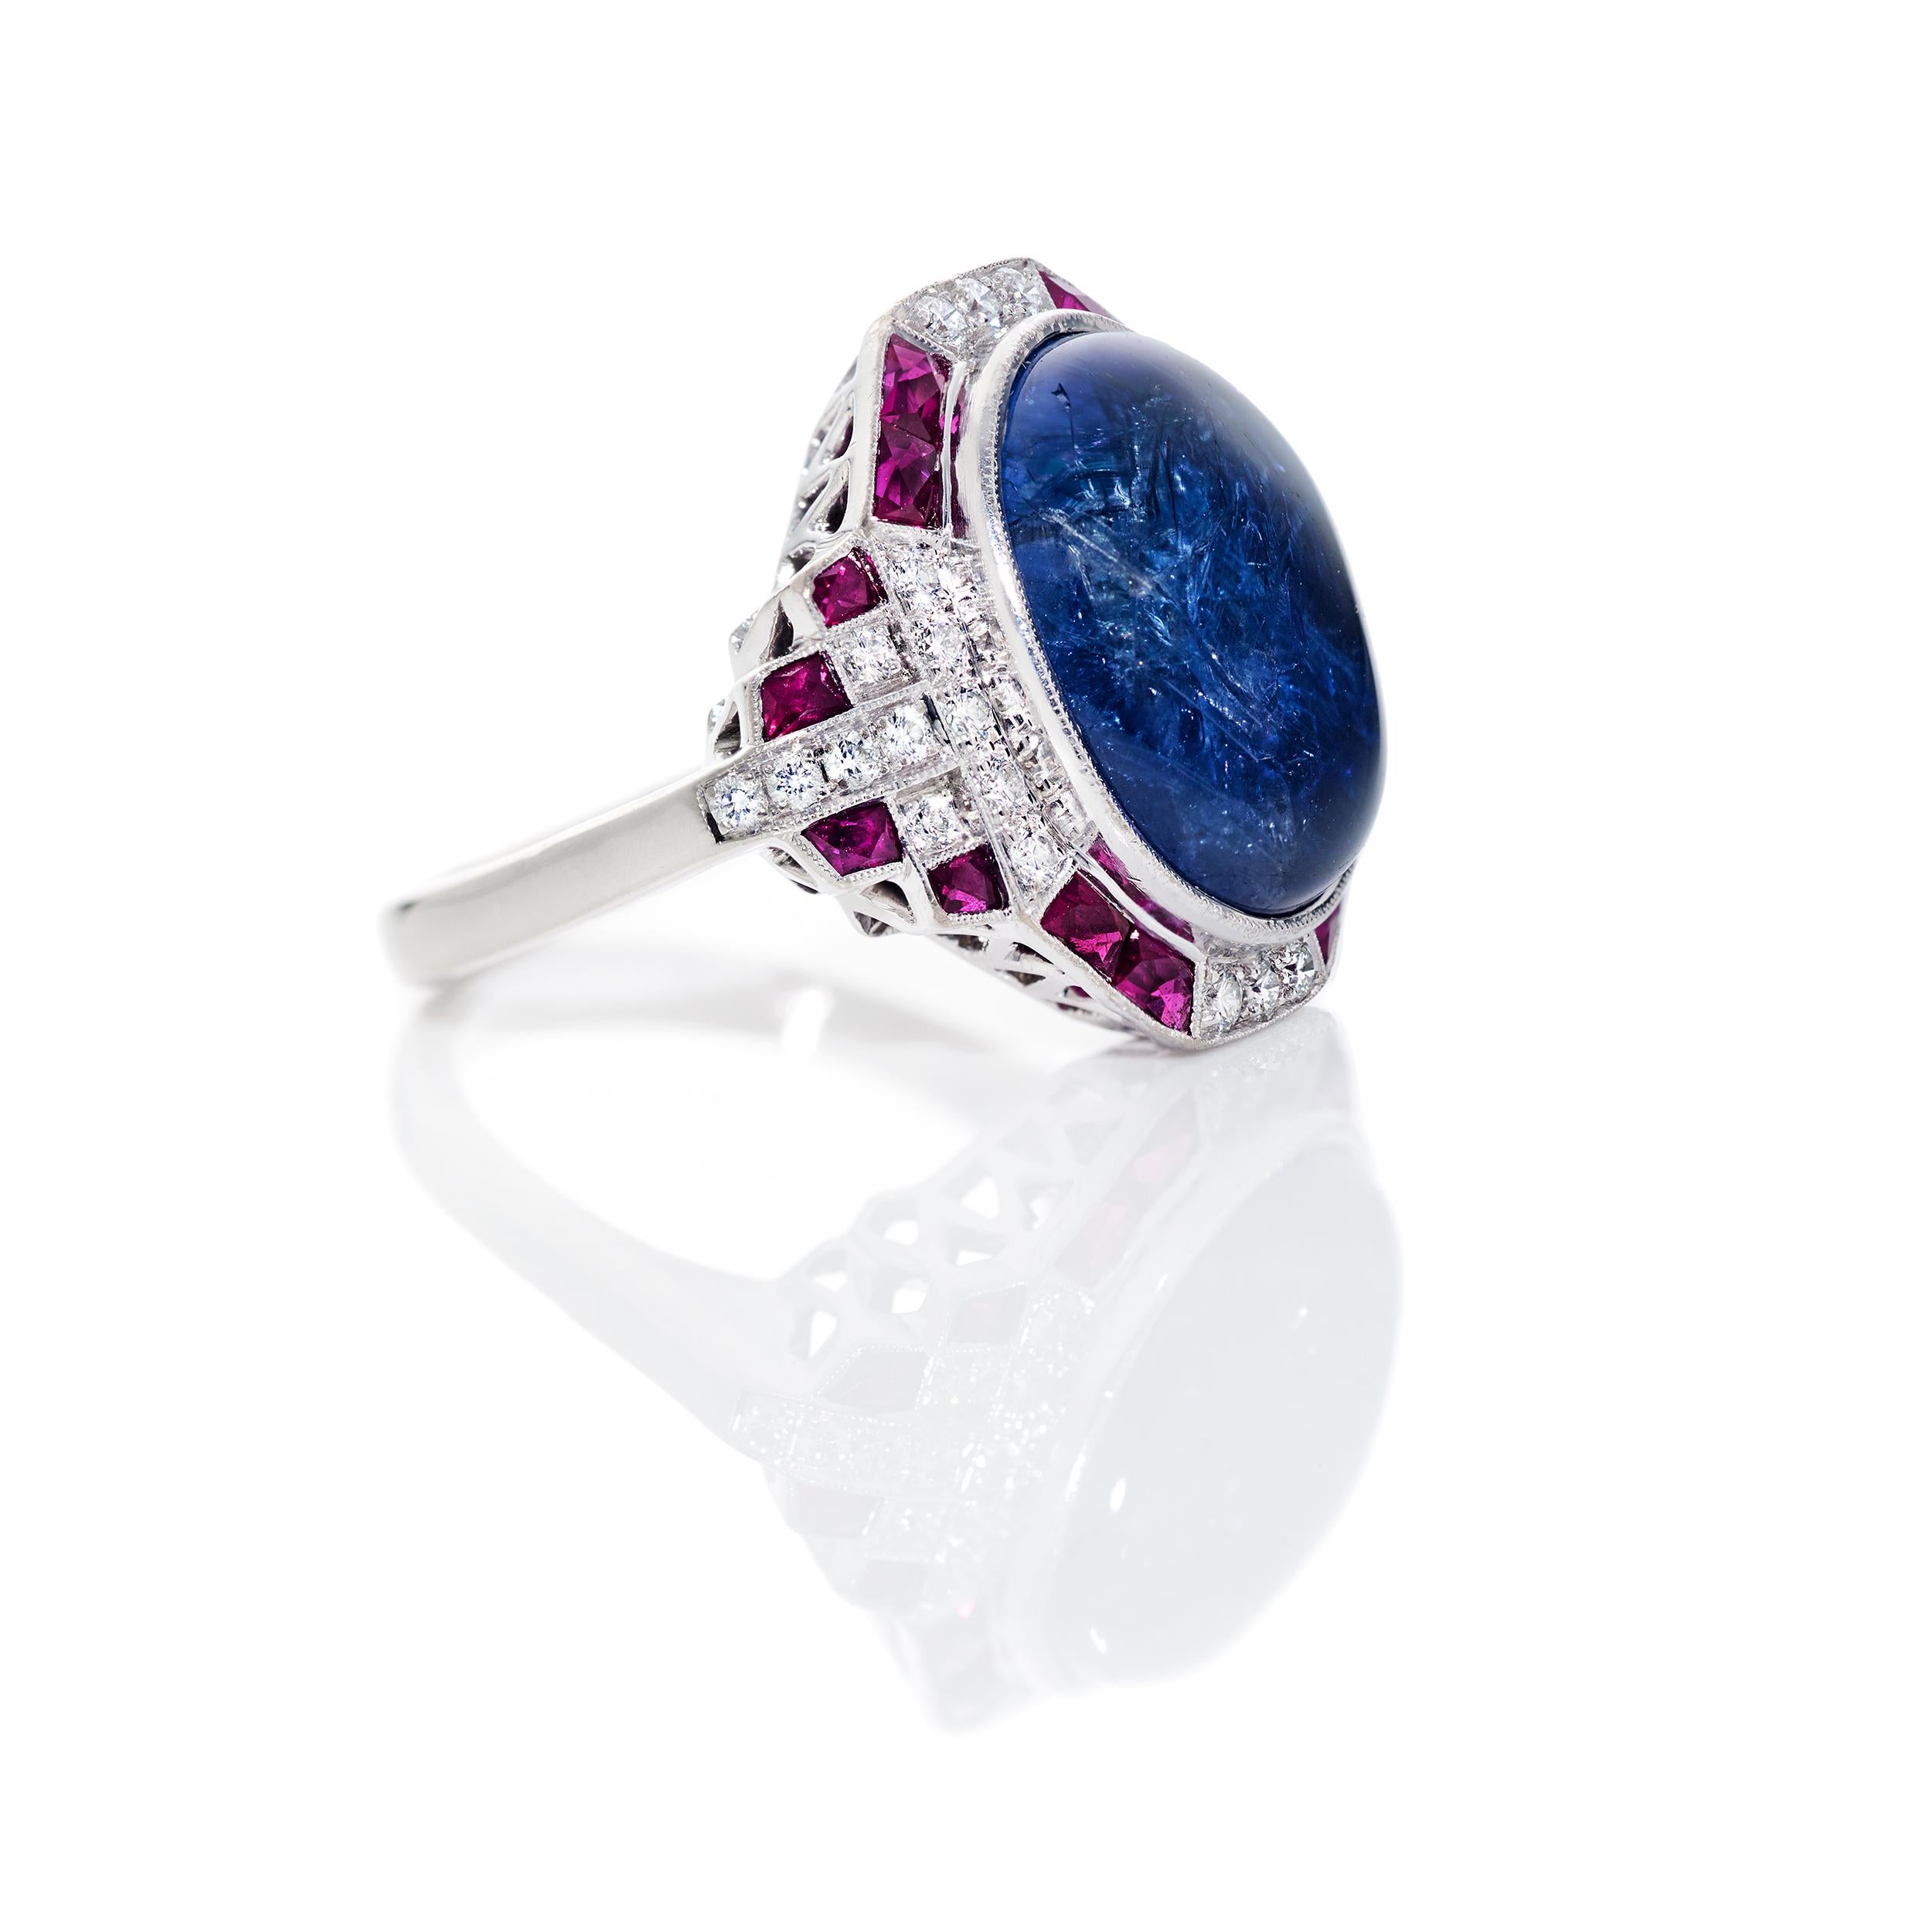 An unbelievable 10.37 Carat Natural, No Heat, Blue Sapphire Cabochon surrounded by 0.80 Carats of Square Cut Rubies and another 0.31 Carats of G/H Color, SI Clarity Diamonds.  This ring is as comfortable as it is striking with its low profile and